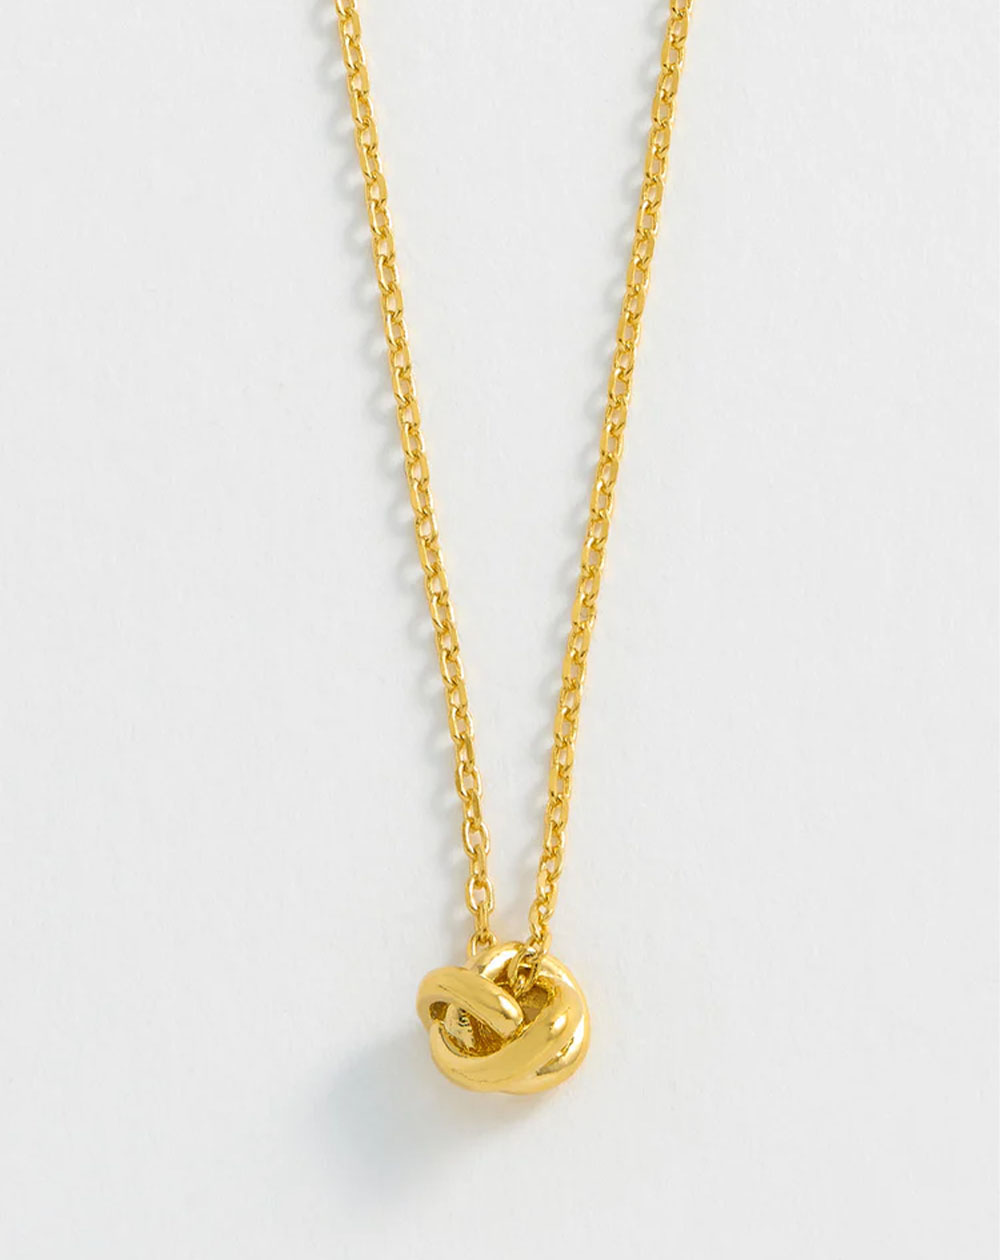 Estella Bartlett - Knot Charm Necklace - Gold Plated